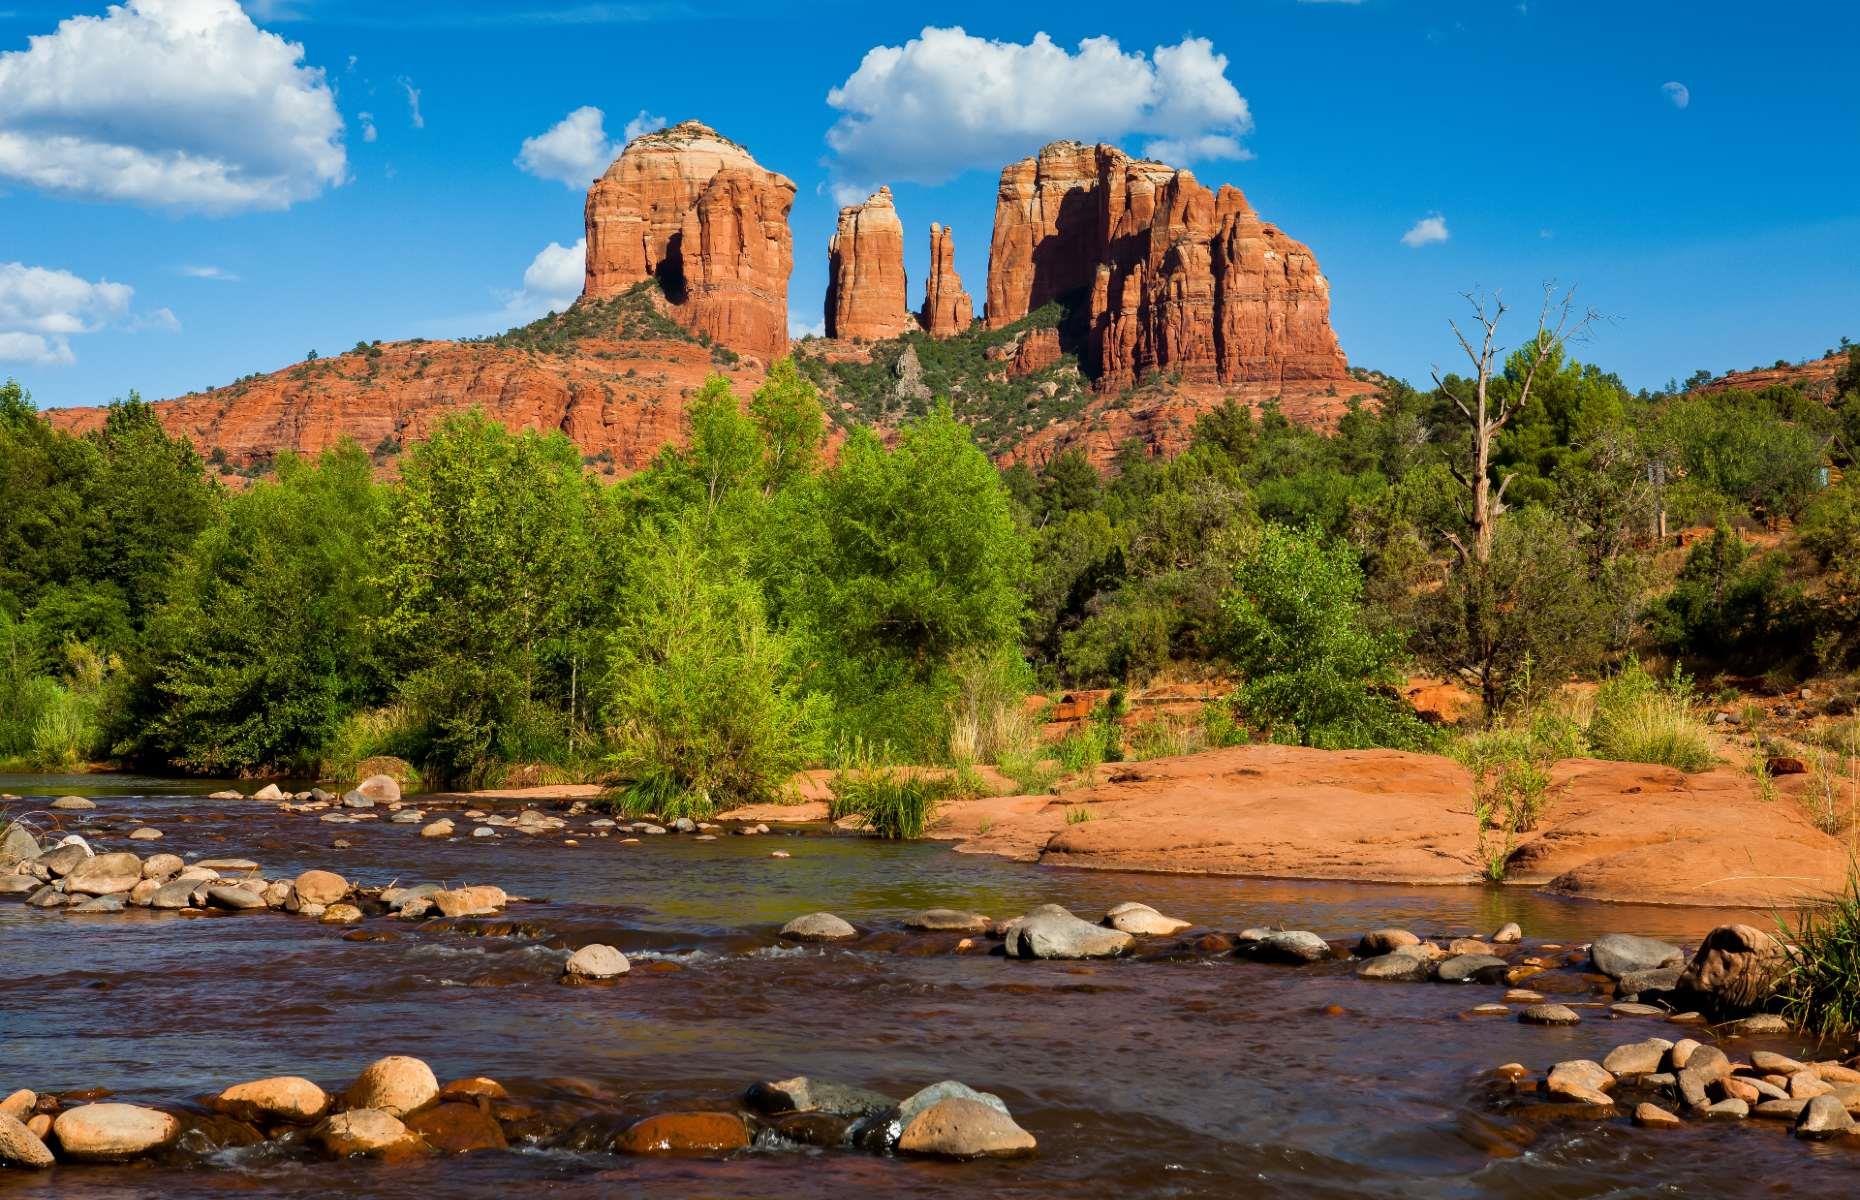 <p>A magnet for outdoorsy types, Sedona enjoys a picturesque location at the base of Oak Creek Canyon, surrounded by 1.8 million acres of national forest land. You could easily get swept away in all the activities to be enjoyed nearby, from hiking and biking to rafting and fishing, but the town itself is also well worth exploring. Thanks to its longstanding connection to the art world – surrealist painter Max Ernst and his wife Dorothea Tanning moved here in the 1940s – there are more than 80 galleries to explore, as well as street art and performing arts centers.</p>